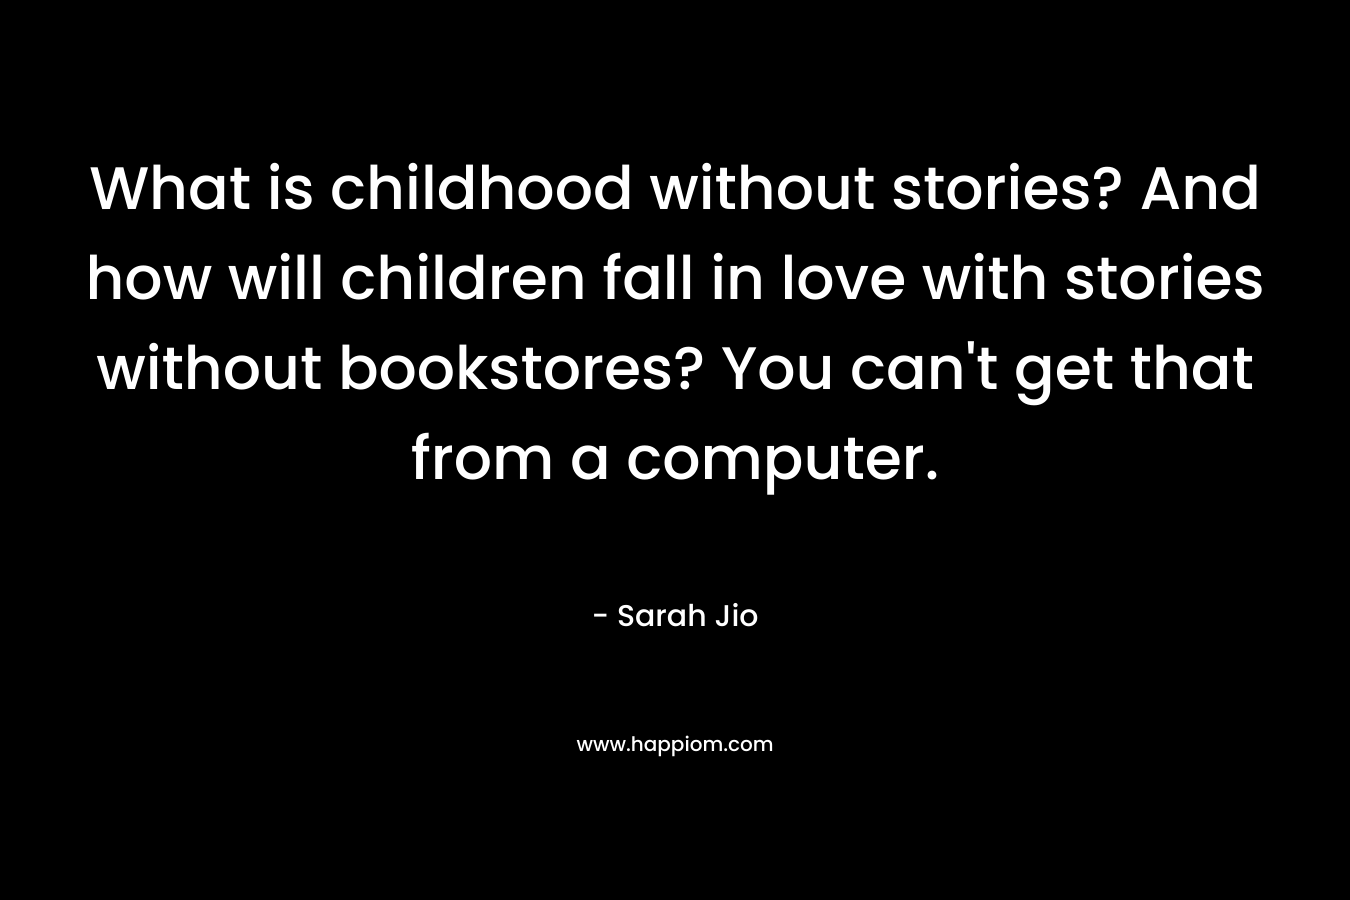 What is childhood without stories? And how will children fall in love with stories without bookstores? You can't get that from a computer.